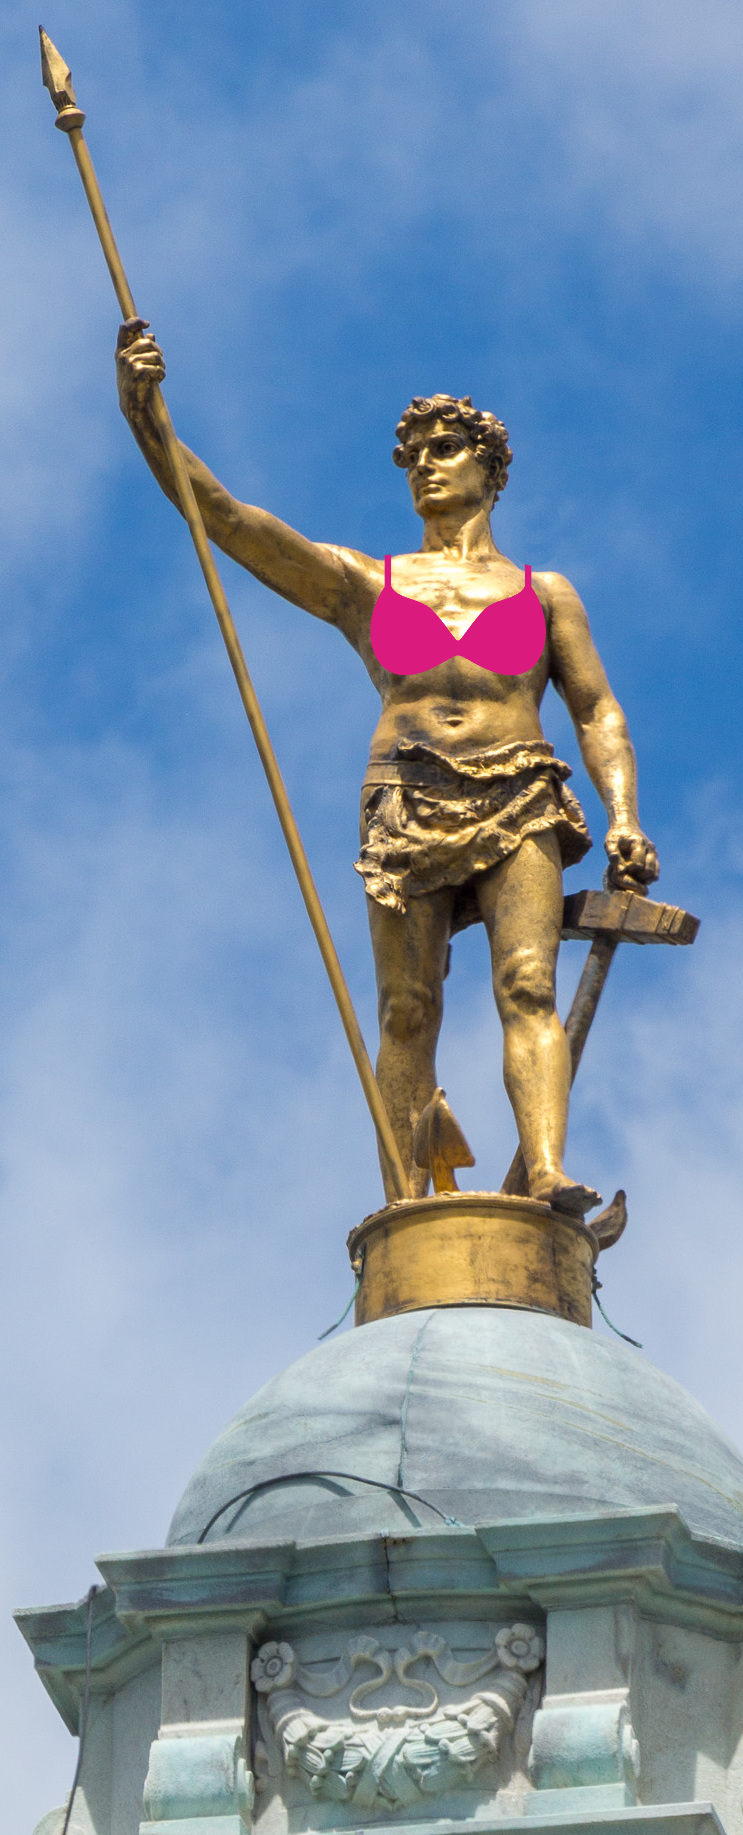 Promotional image for THE ASSEMBLYWOMEN depicting the figure on top of the Statehouse wearing a bra.